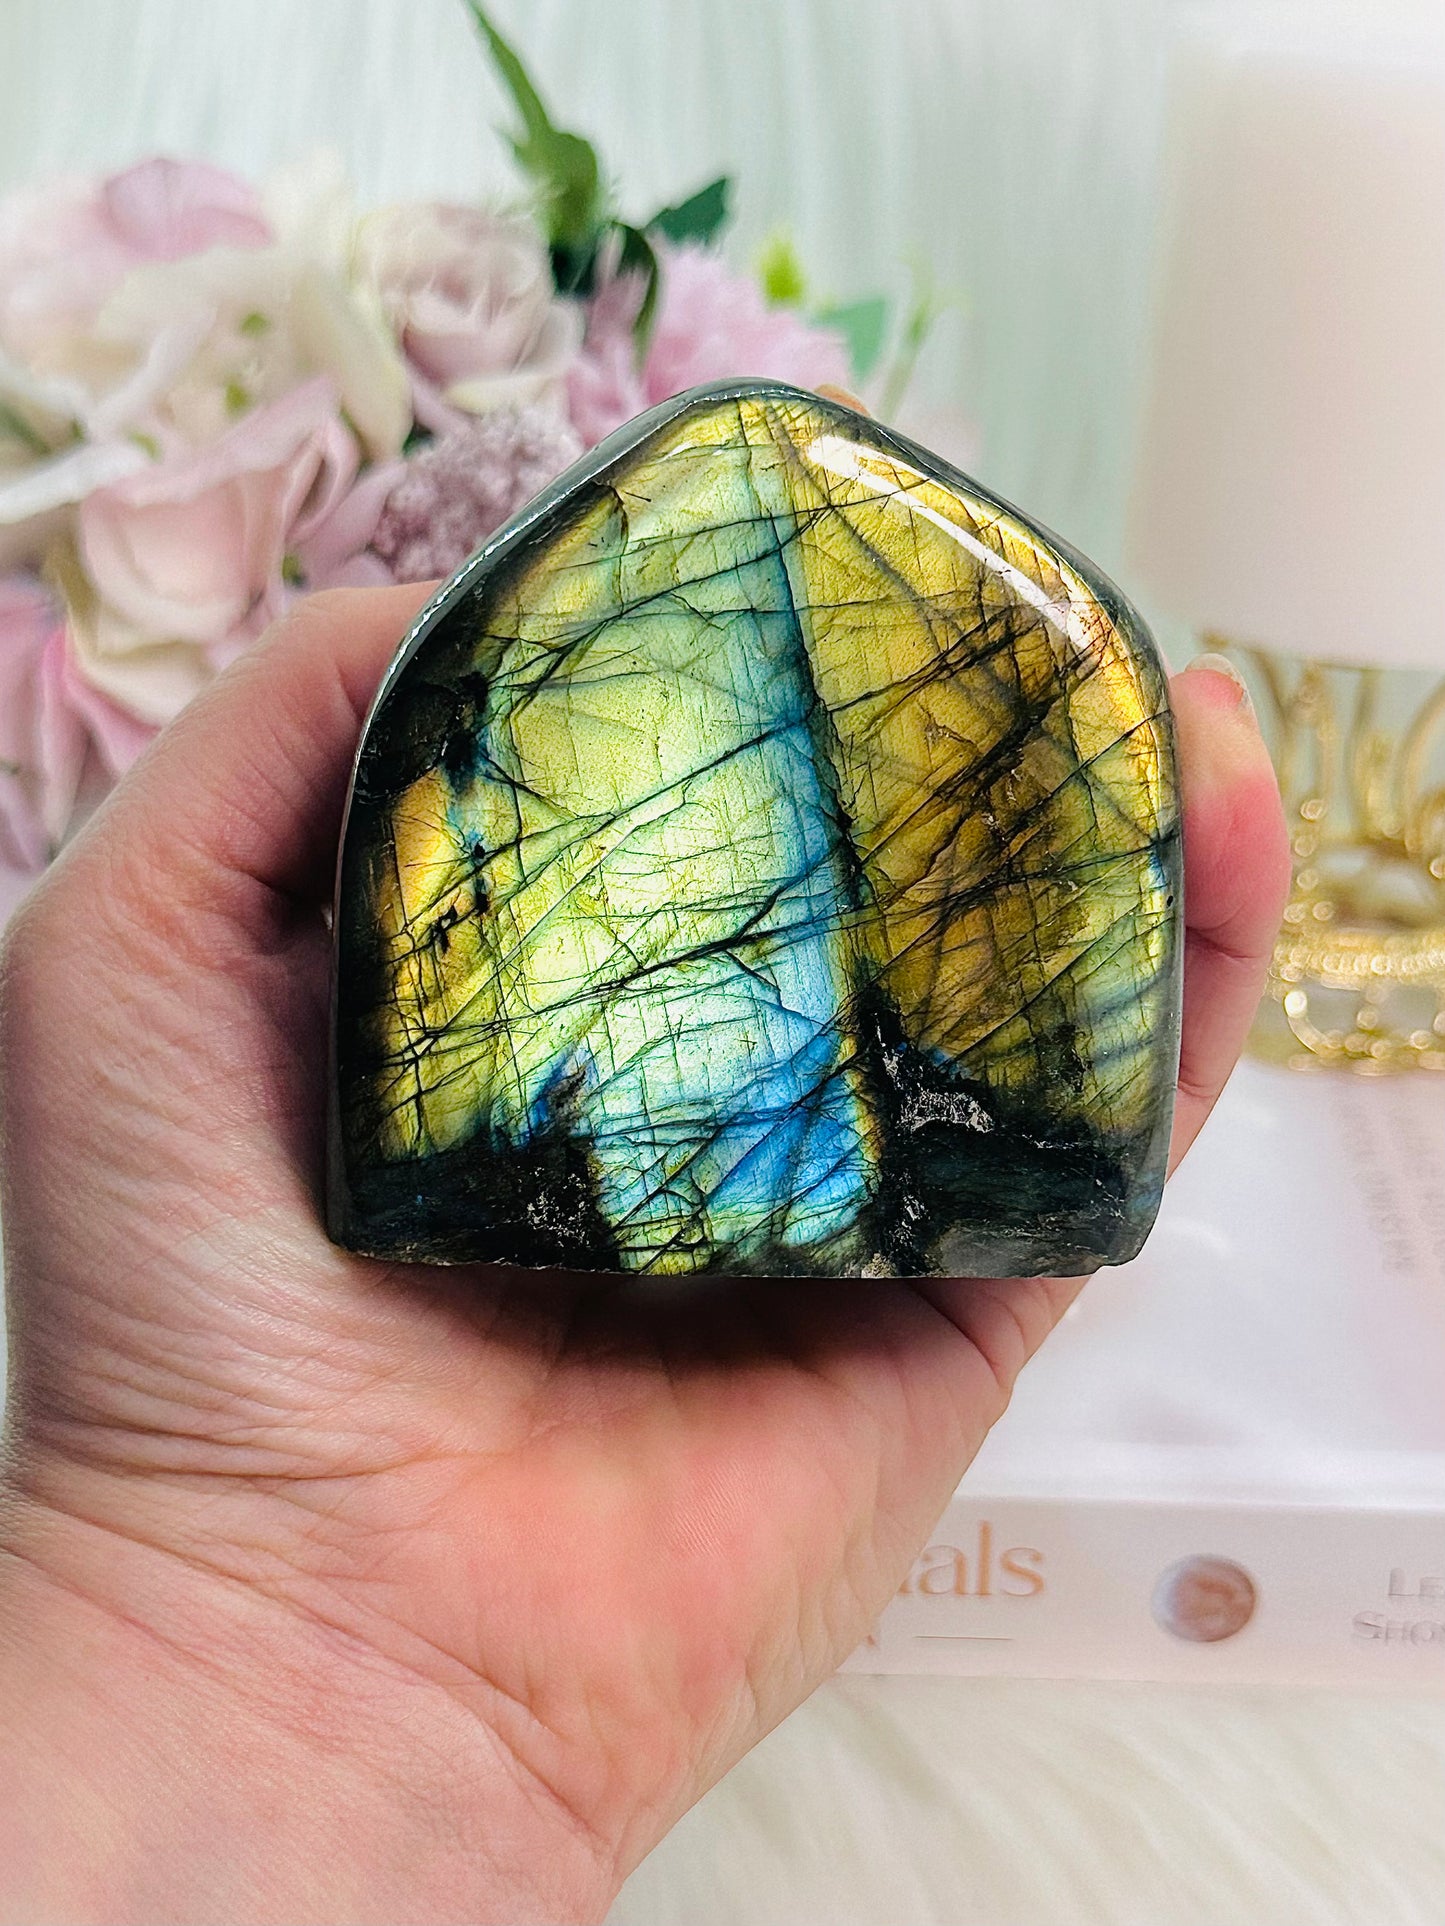 What A Stunner!!!! Absolutely Full of Gorgeous Bright Blue Orange & Yellow Flash This Perfect Labradorite Polished Freeform 362grams